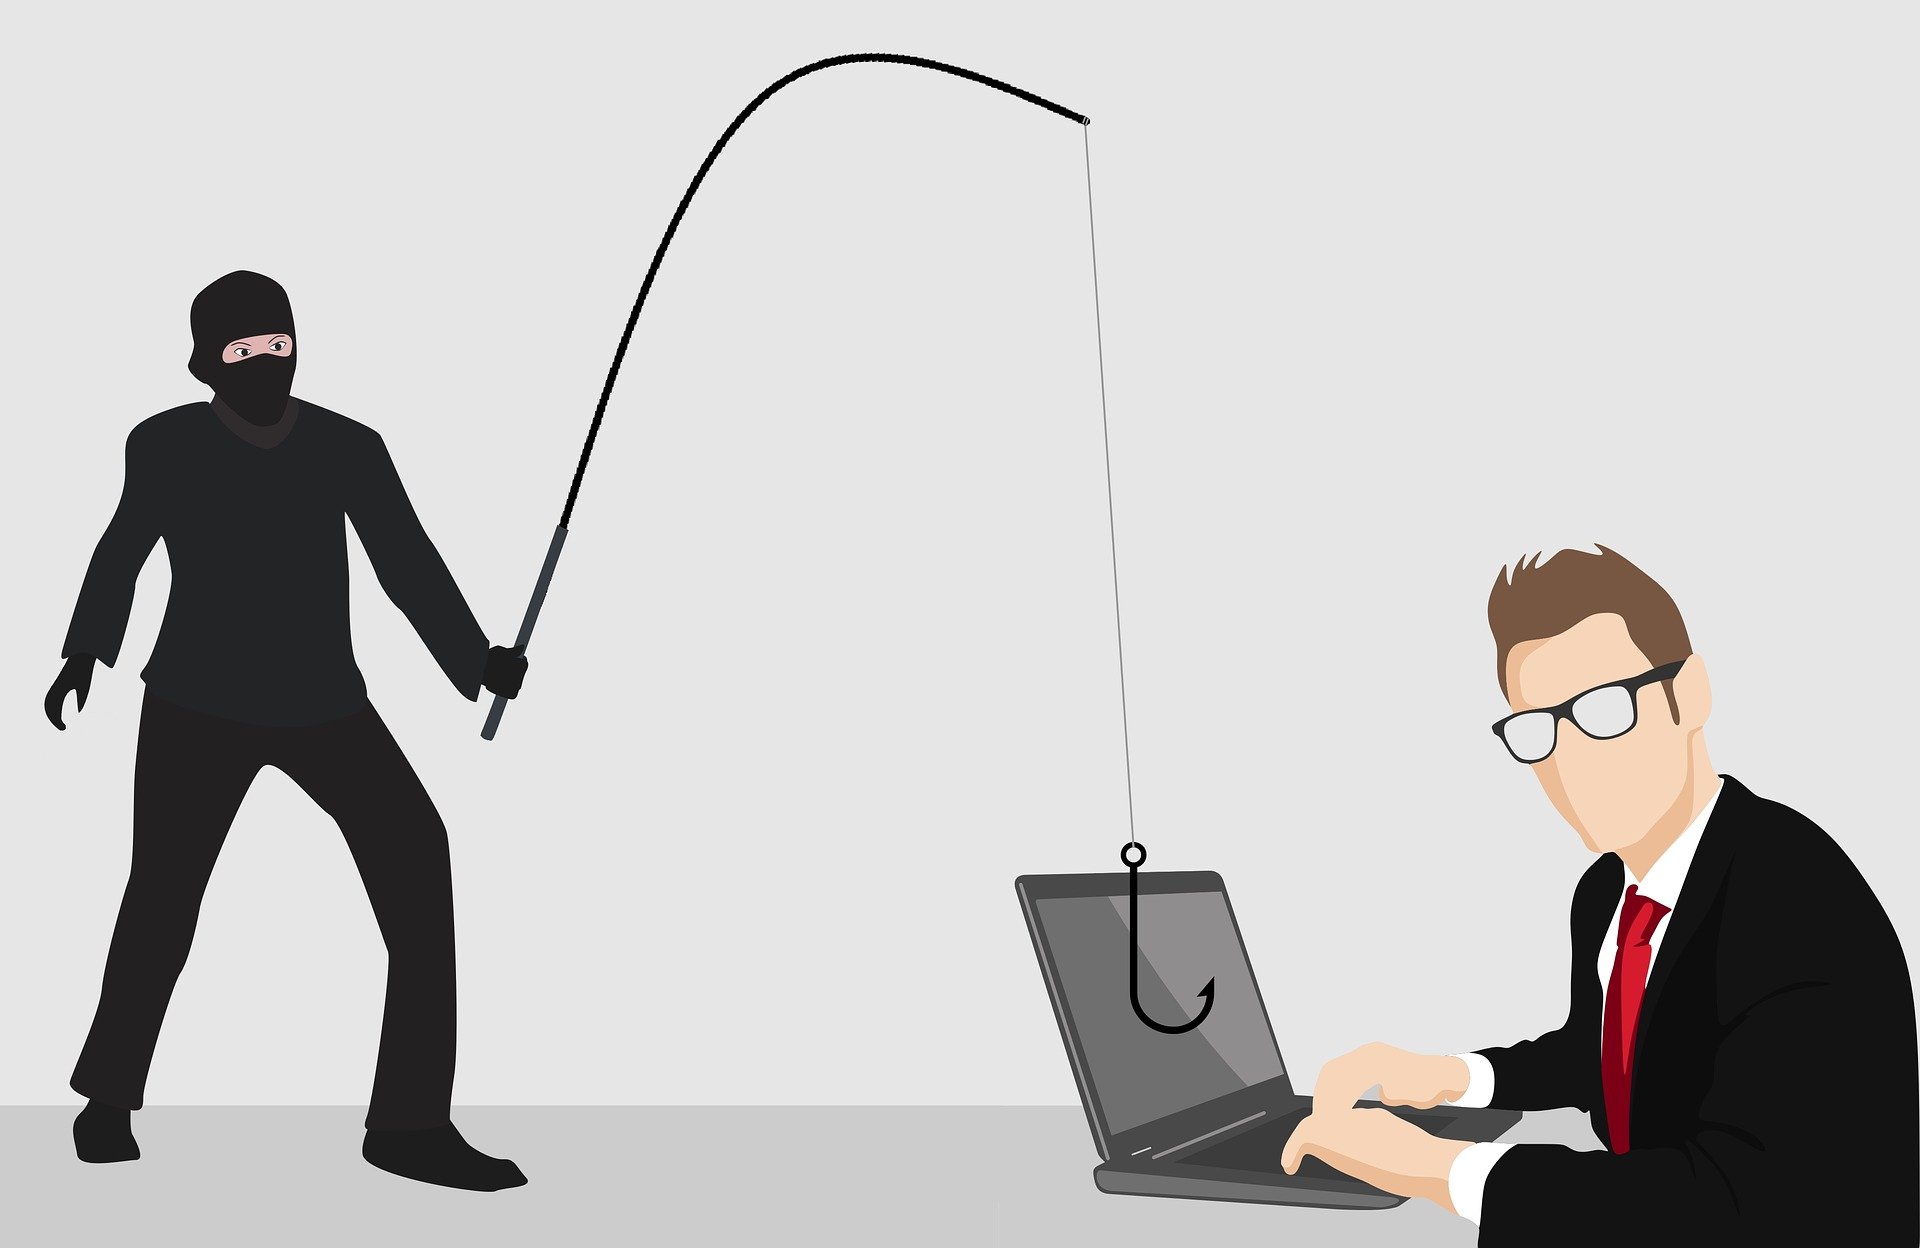 Image shows someone in black with a fishing line. The end of the line is draped over a computer where a man sits dressed in a suit. It is an illustration.